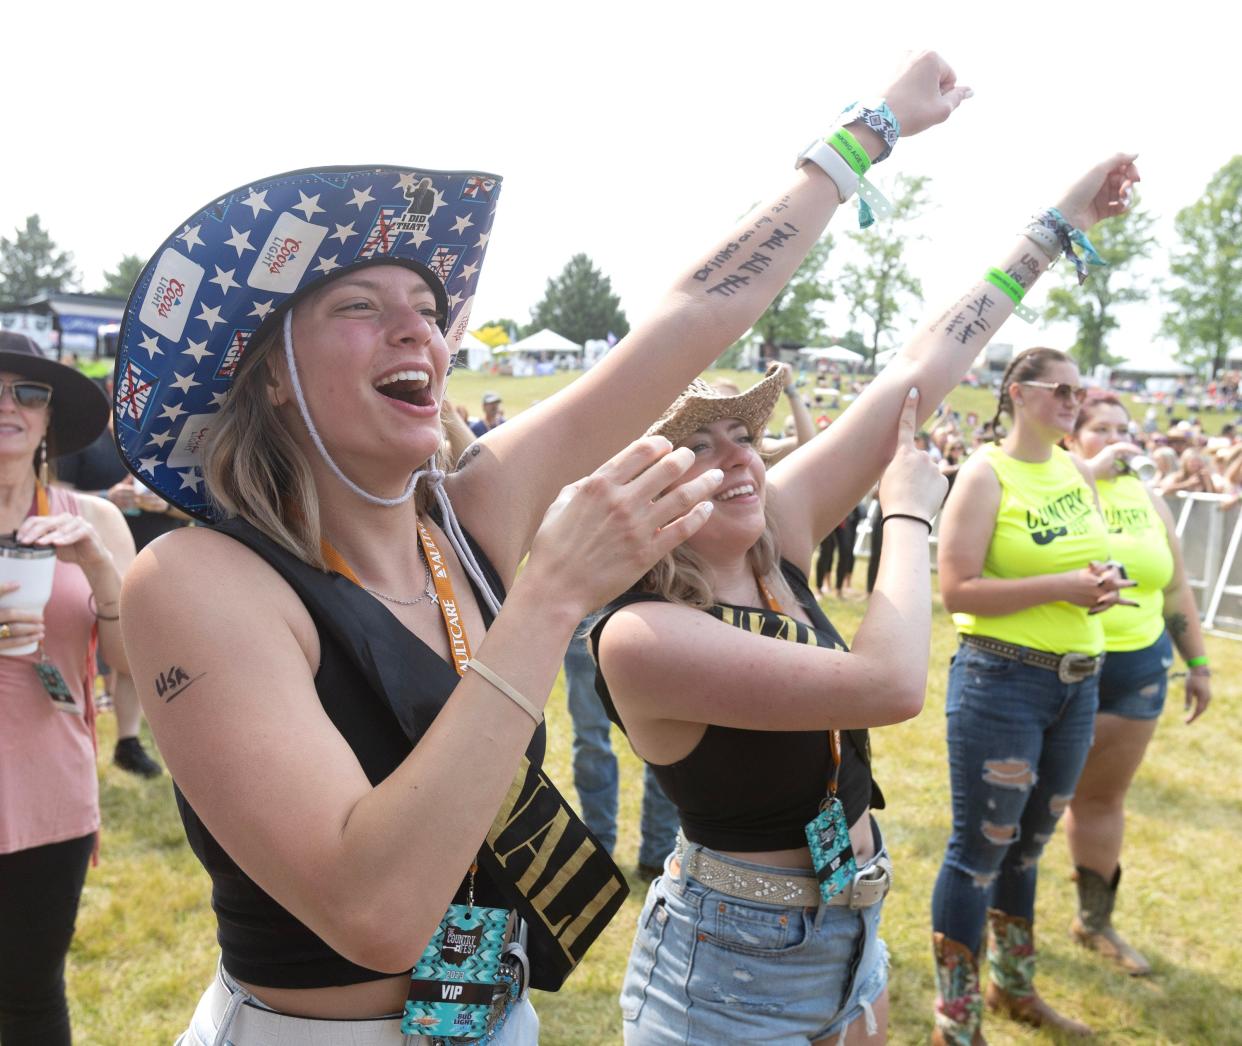 Fans enjoy a concert at The Country Fest last summer at Clay's Resort Jellystone Park The music festival will be June 12-15 at the Stark County venue.